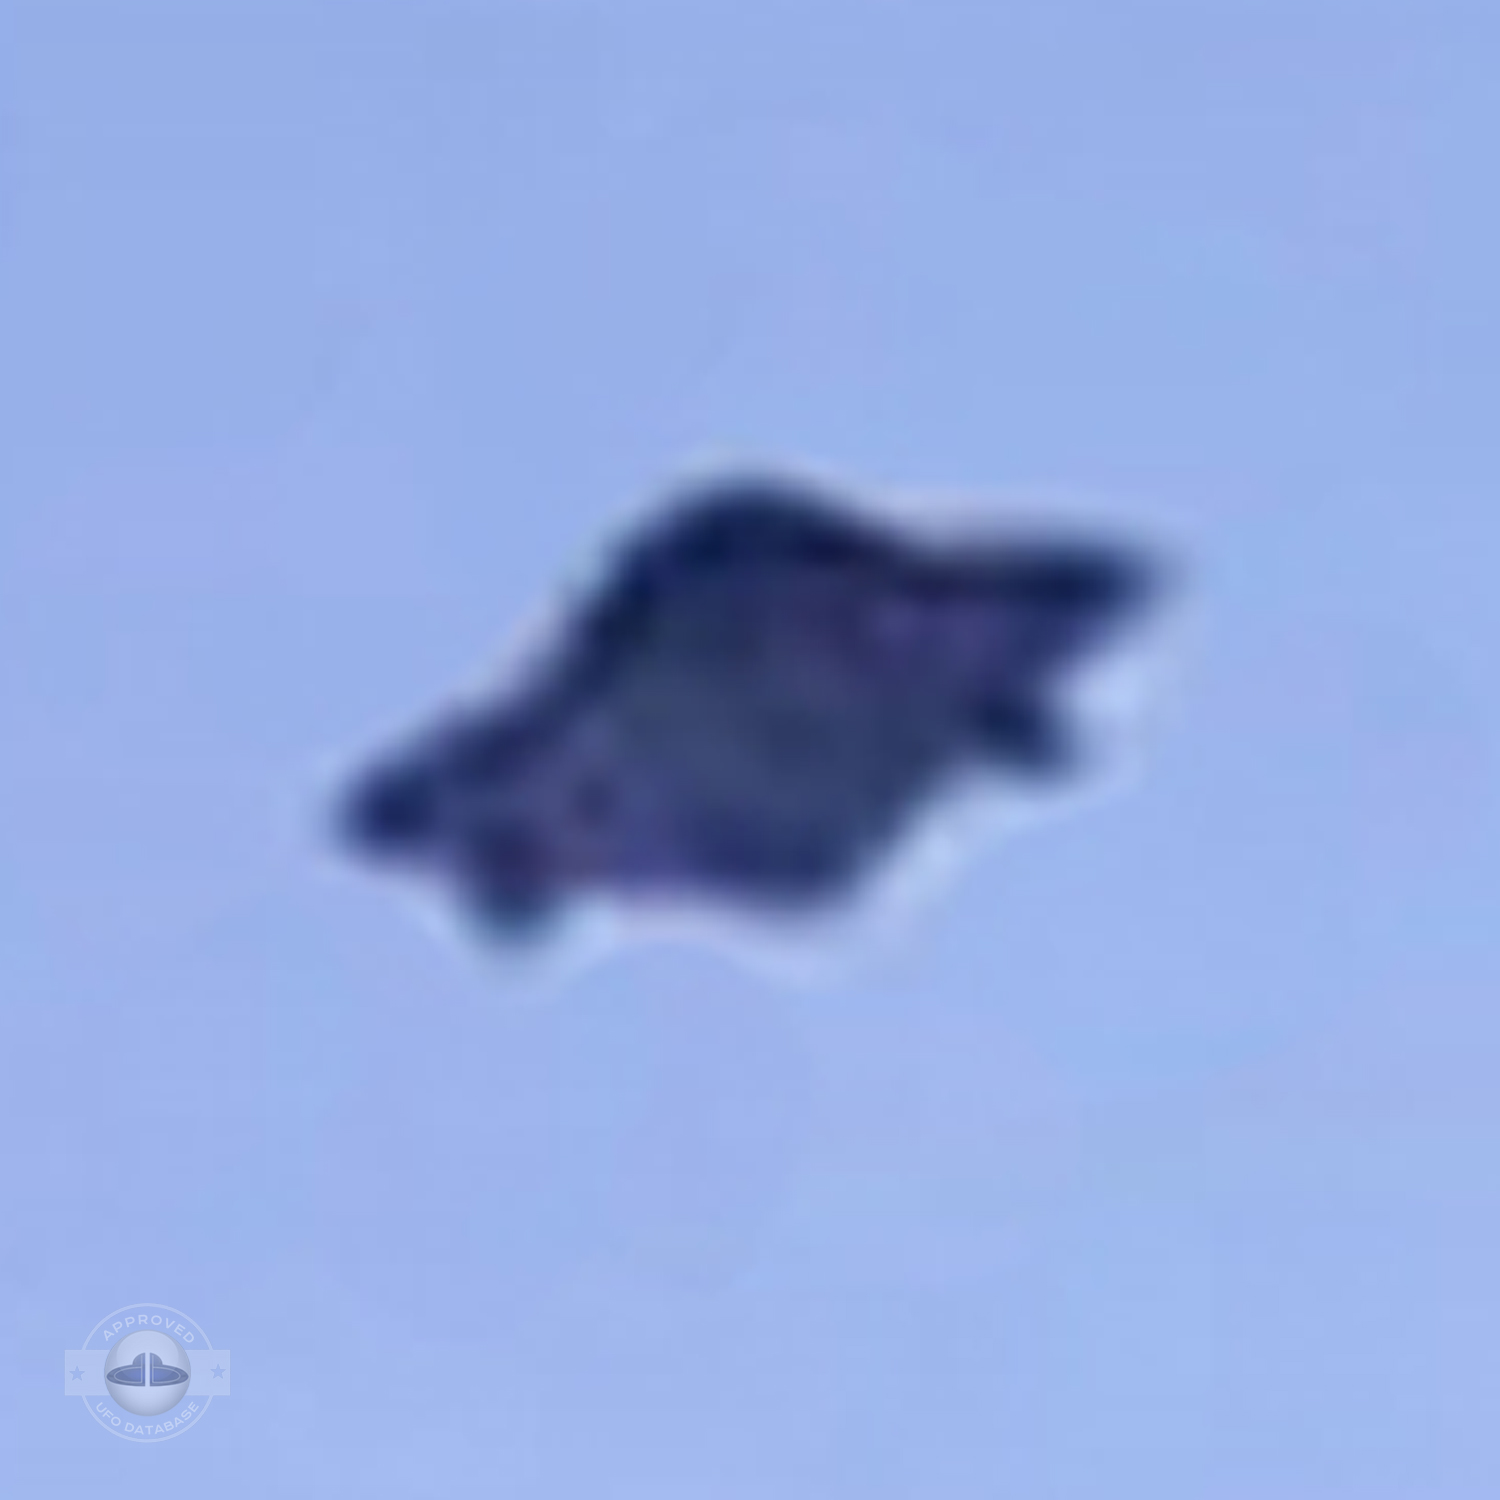 Teen student photograph incredible UFO picture | Koyang, South Korea UFO Picture #197-4